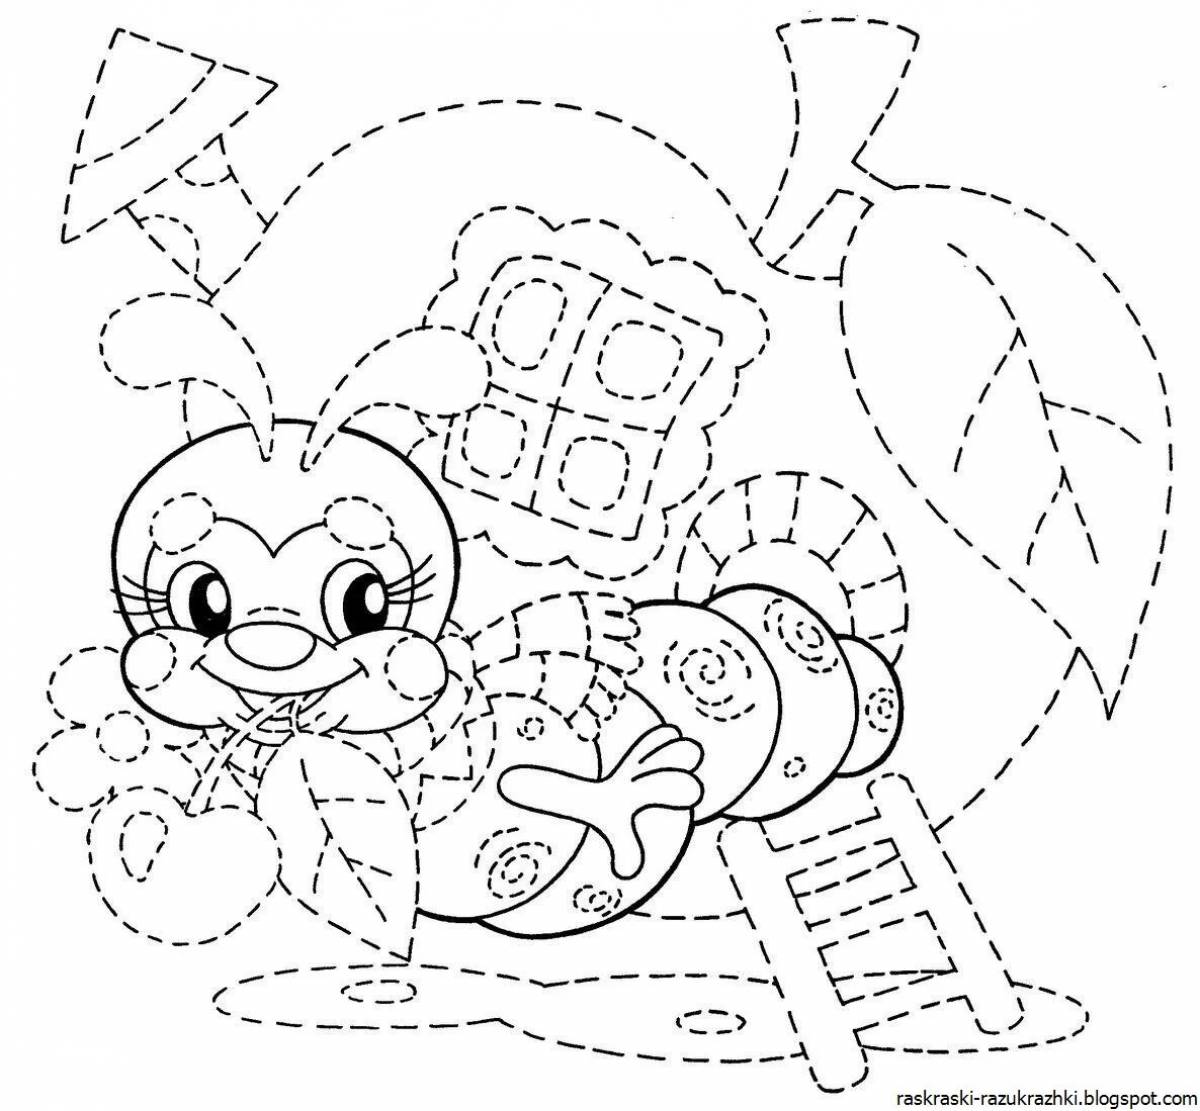 Fun educational coloring book for girls 5-6 years old